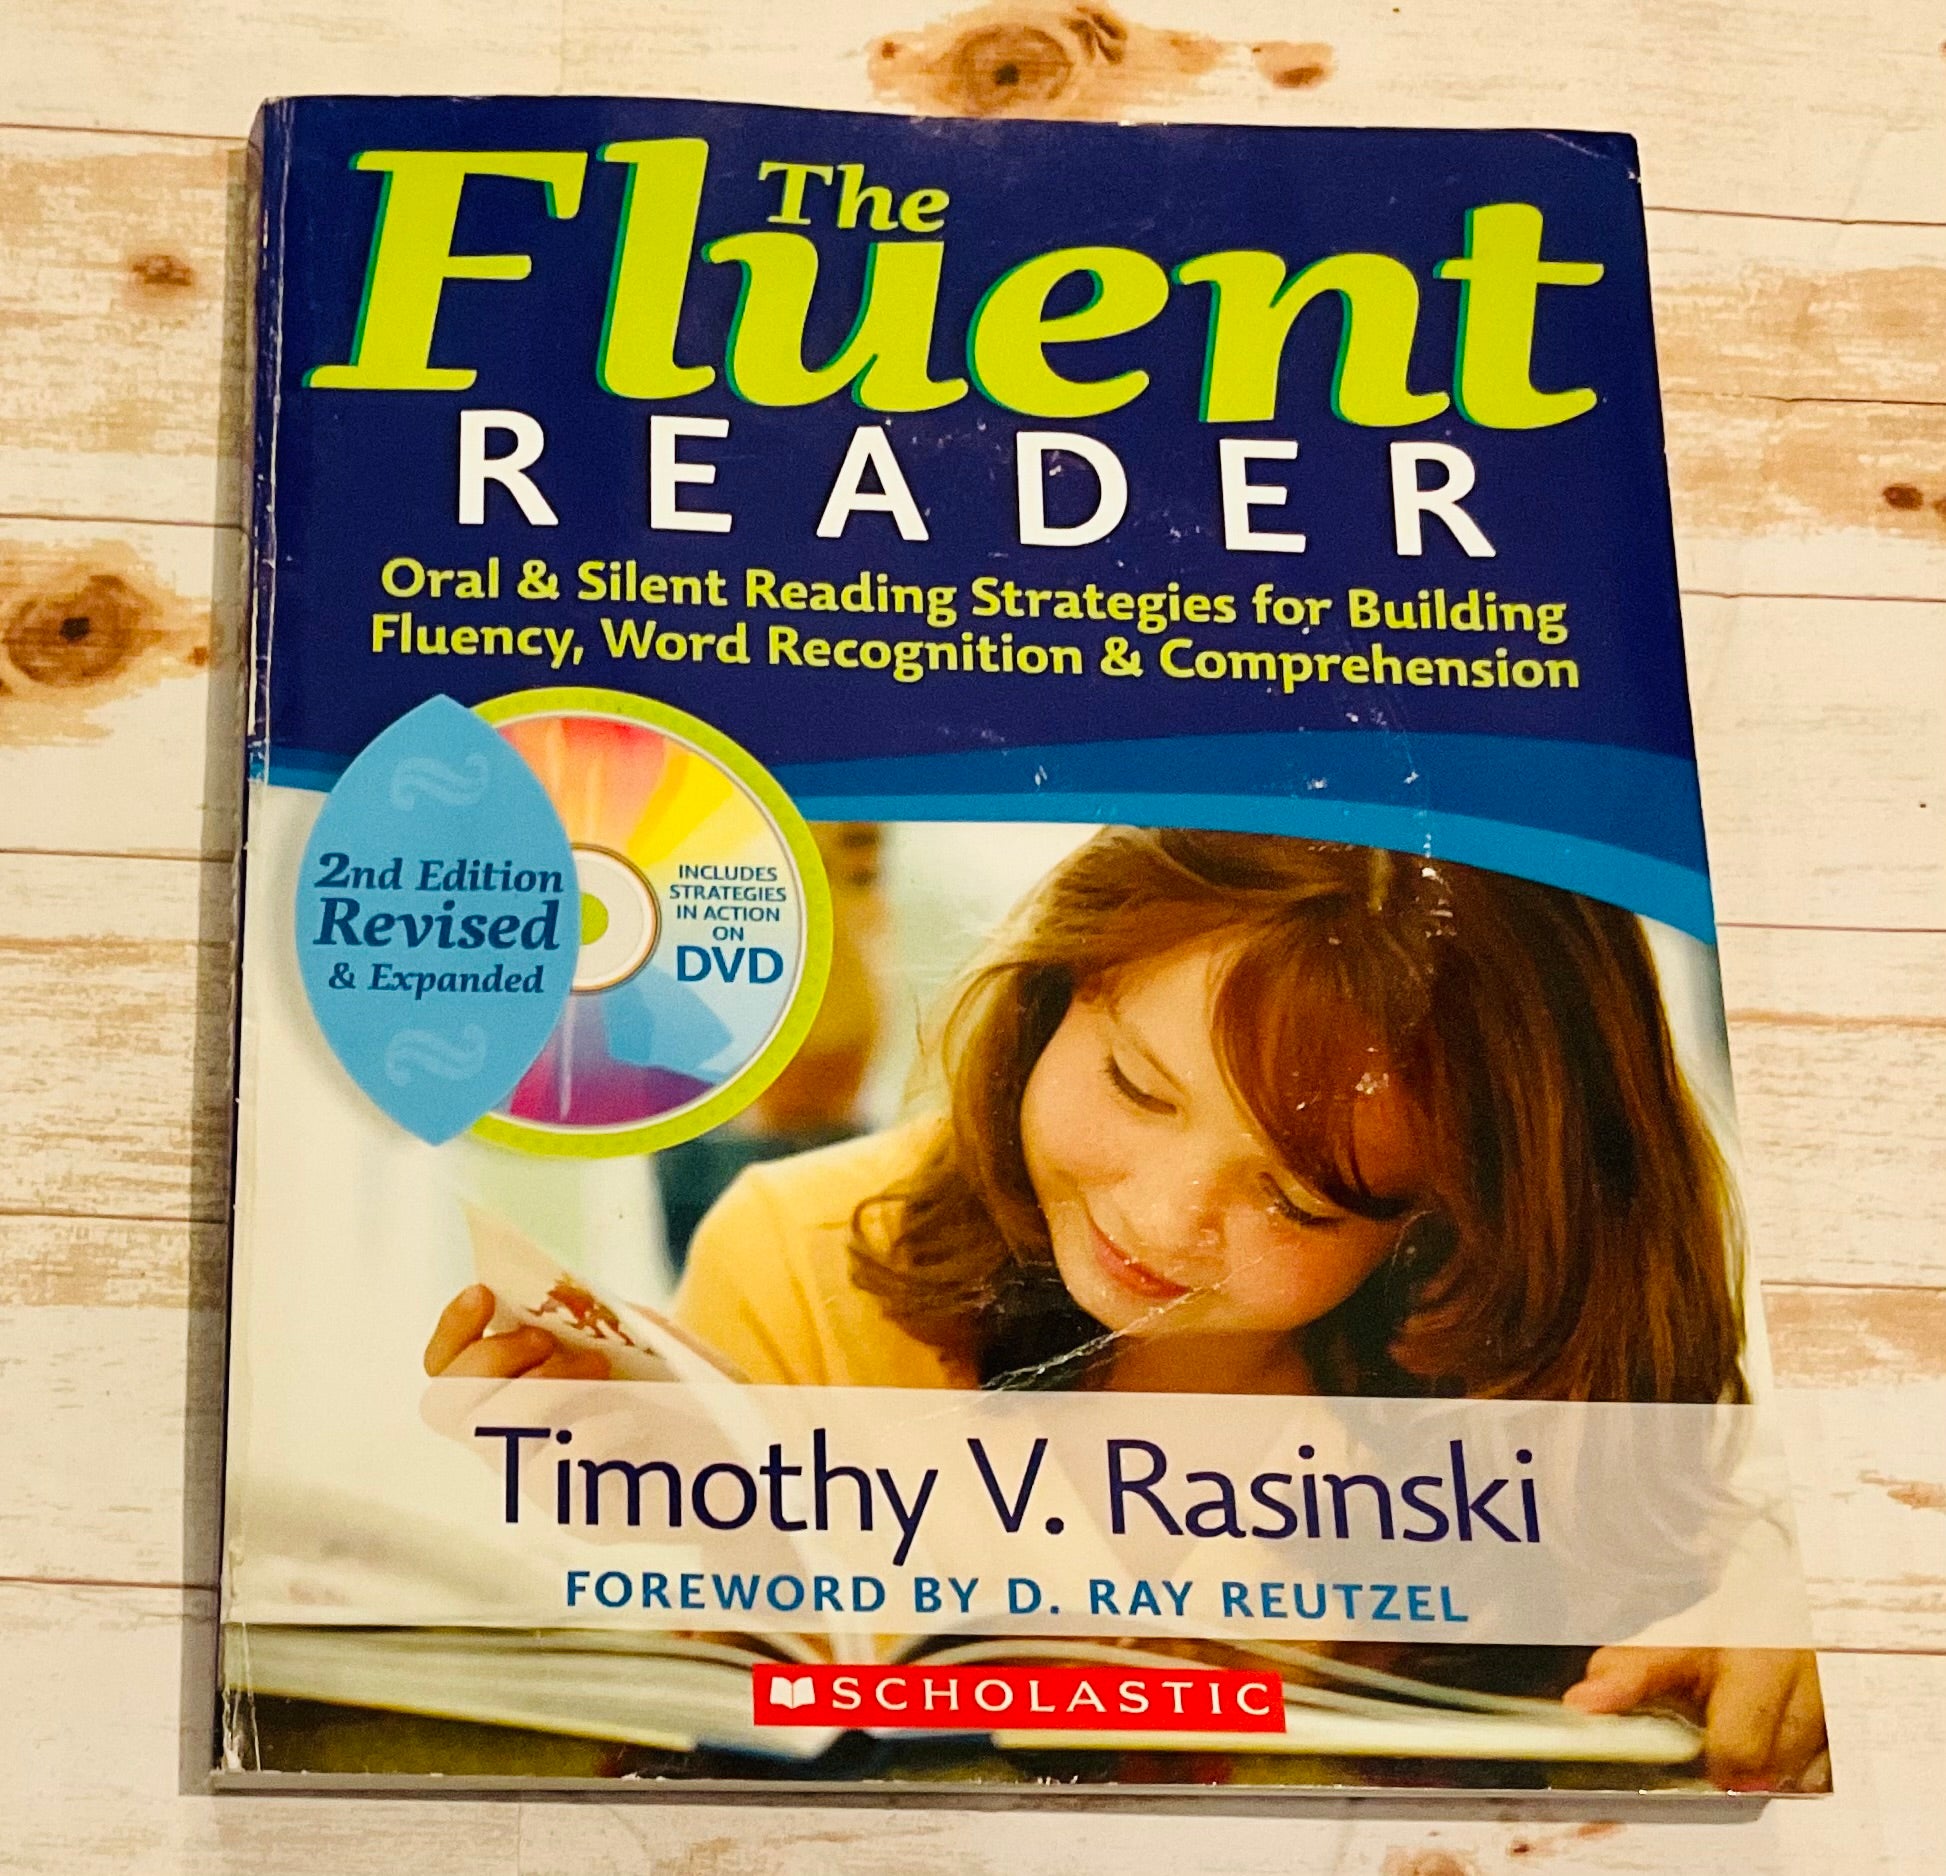 The Fluent Reader: Oral and Silent Reading Strategies for Building Fluency, Word Recognition & Comprehension - Anchored Homeschool Resource Center